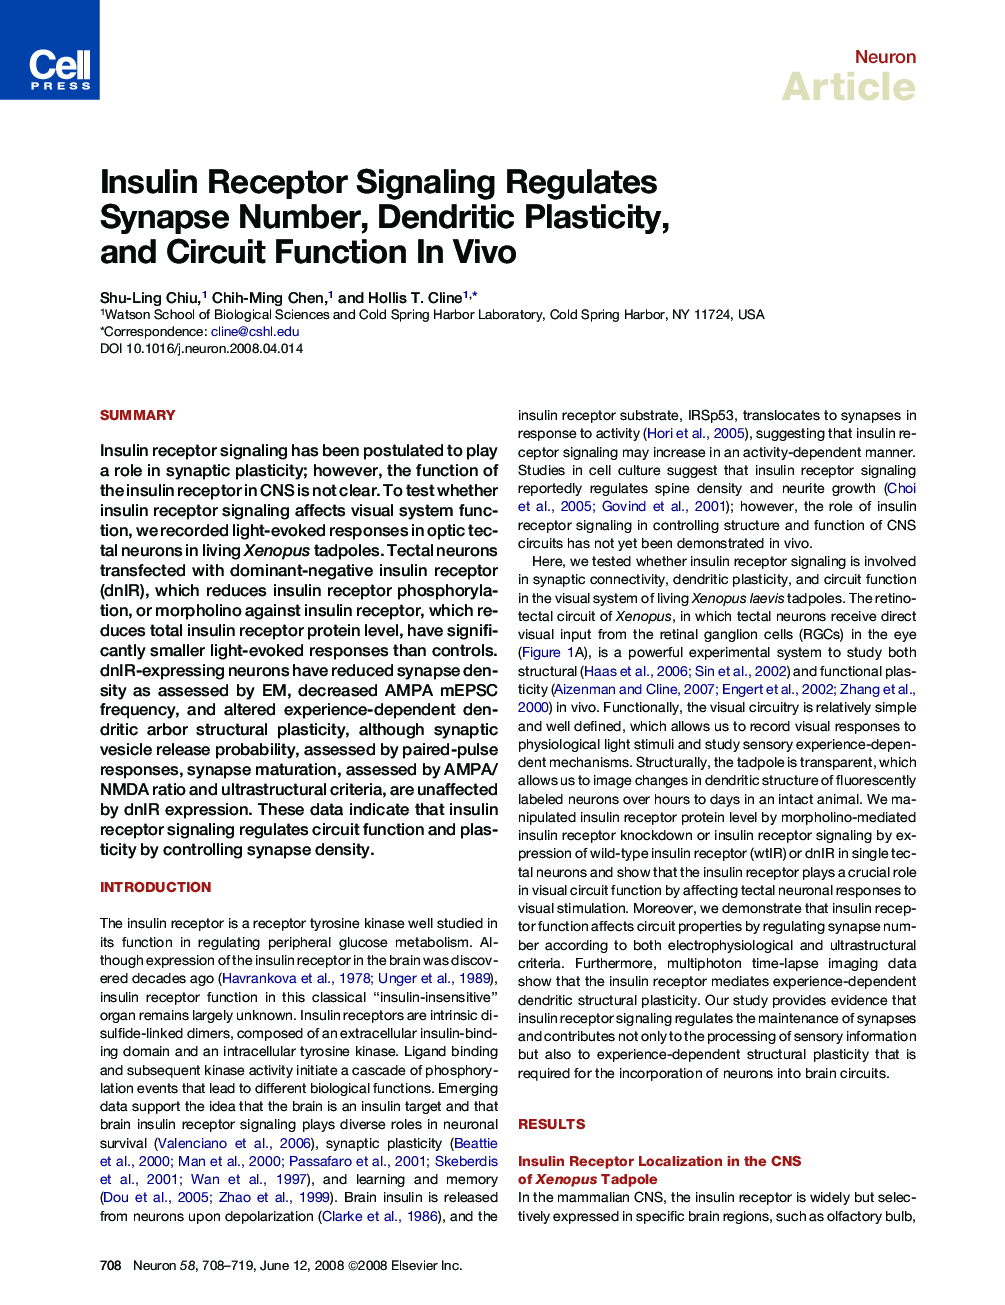 Insulin Receptor Signaling Regulates Synapse Number, Dendritic Plasticity, and Circuit Function In Vivo